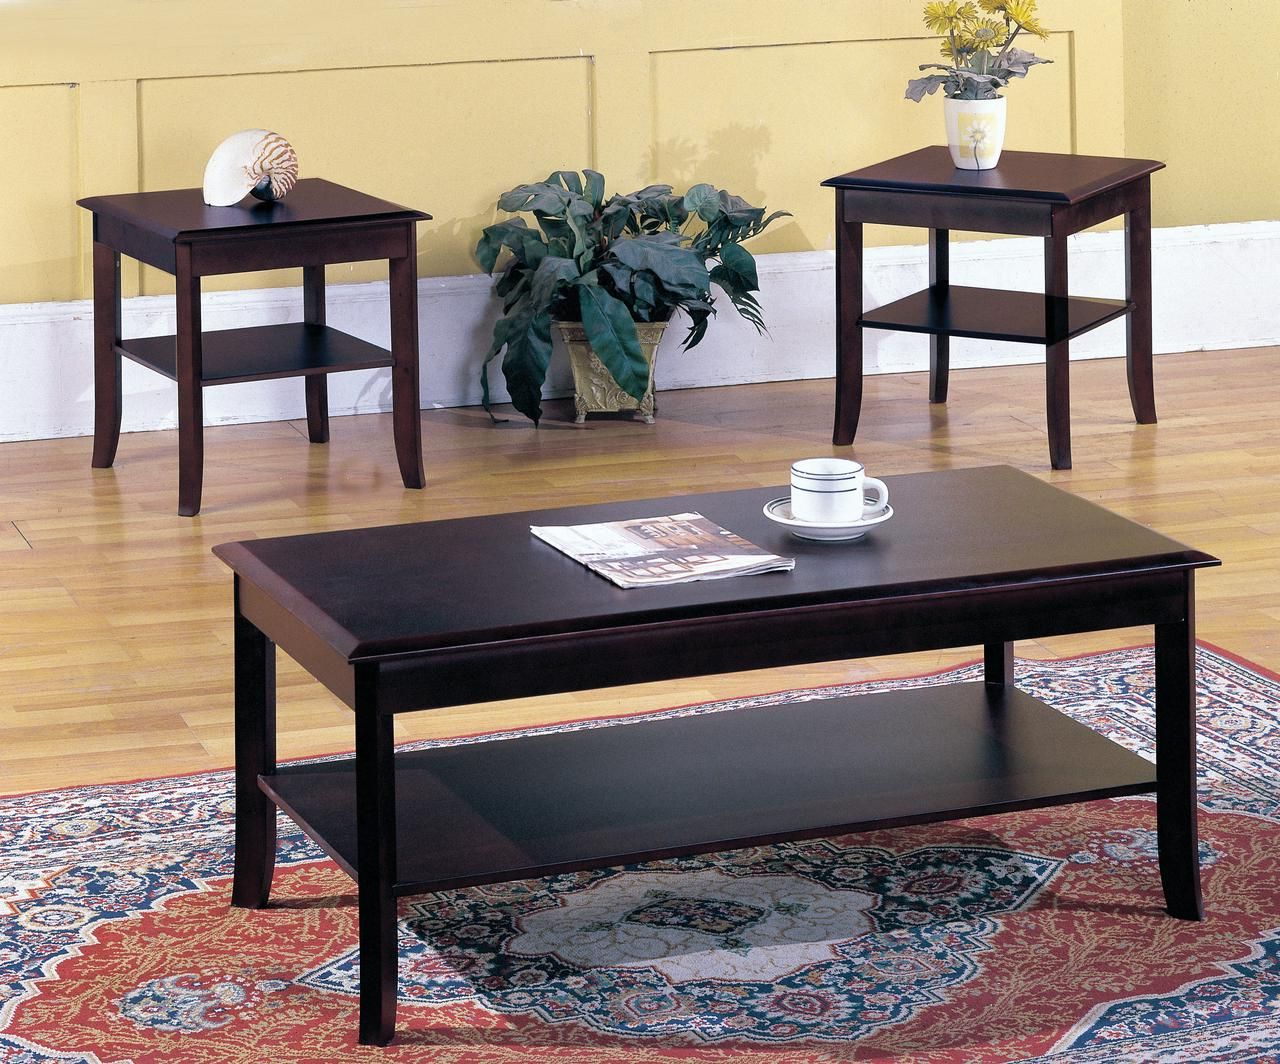 Best And Newest 3 Piece Coffee Tables Pertaining To Vania 3 Piece Contemporary Storage Coffee Table Set, Dark (Gallery 1 of 20)